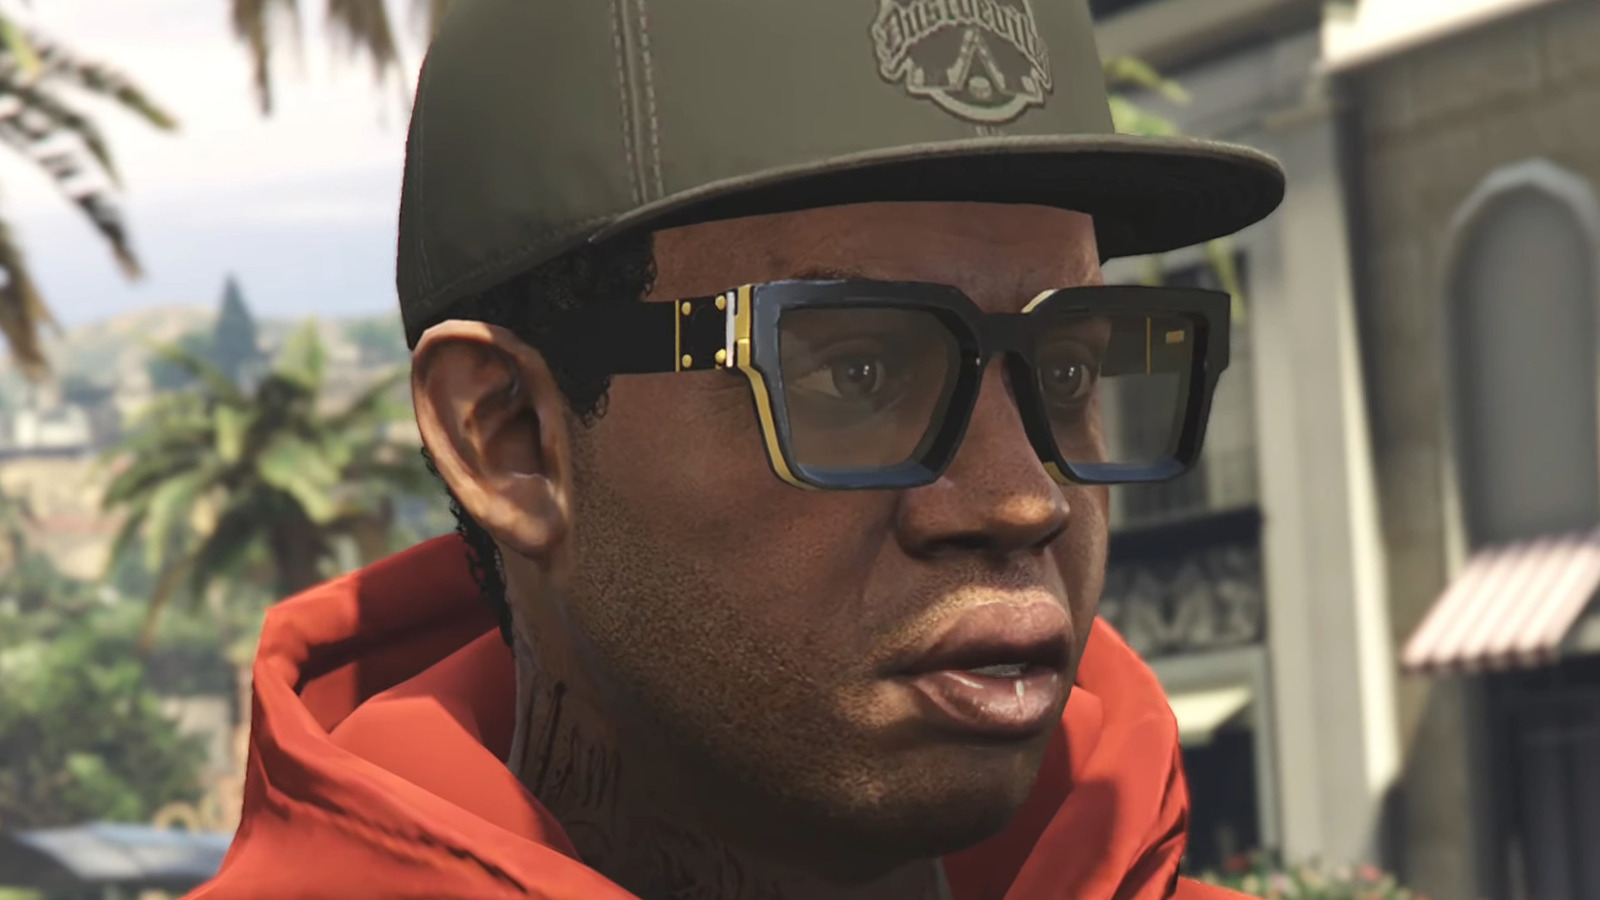 Does GTA Online have cross-play?